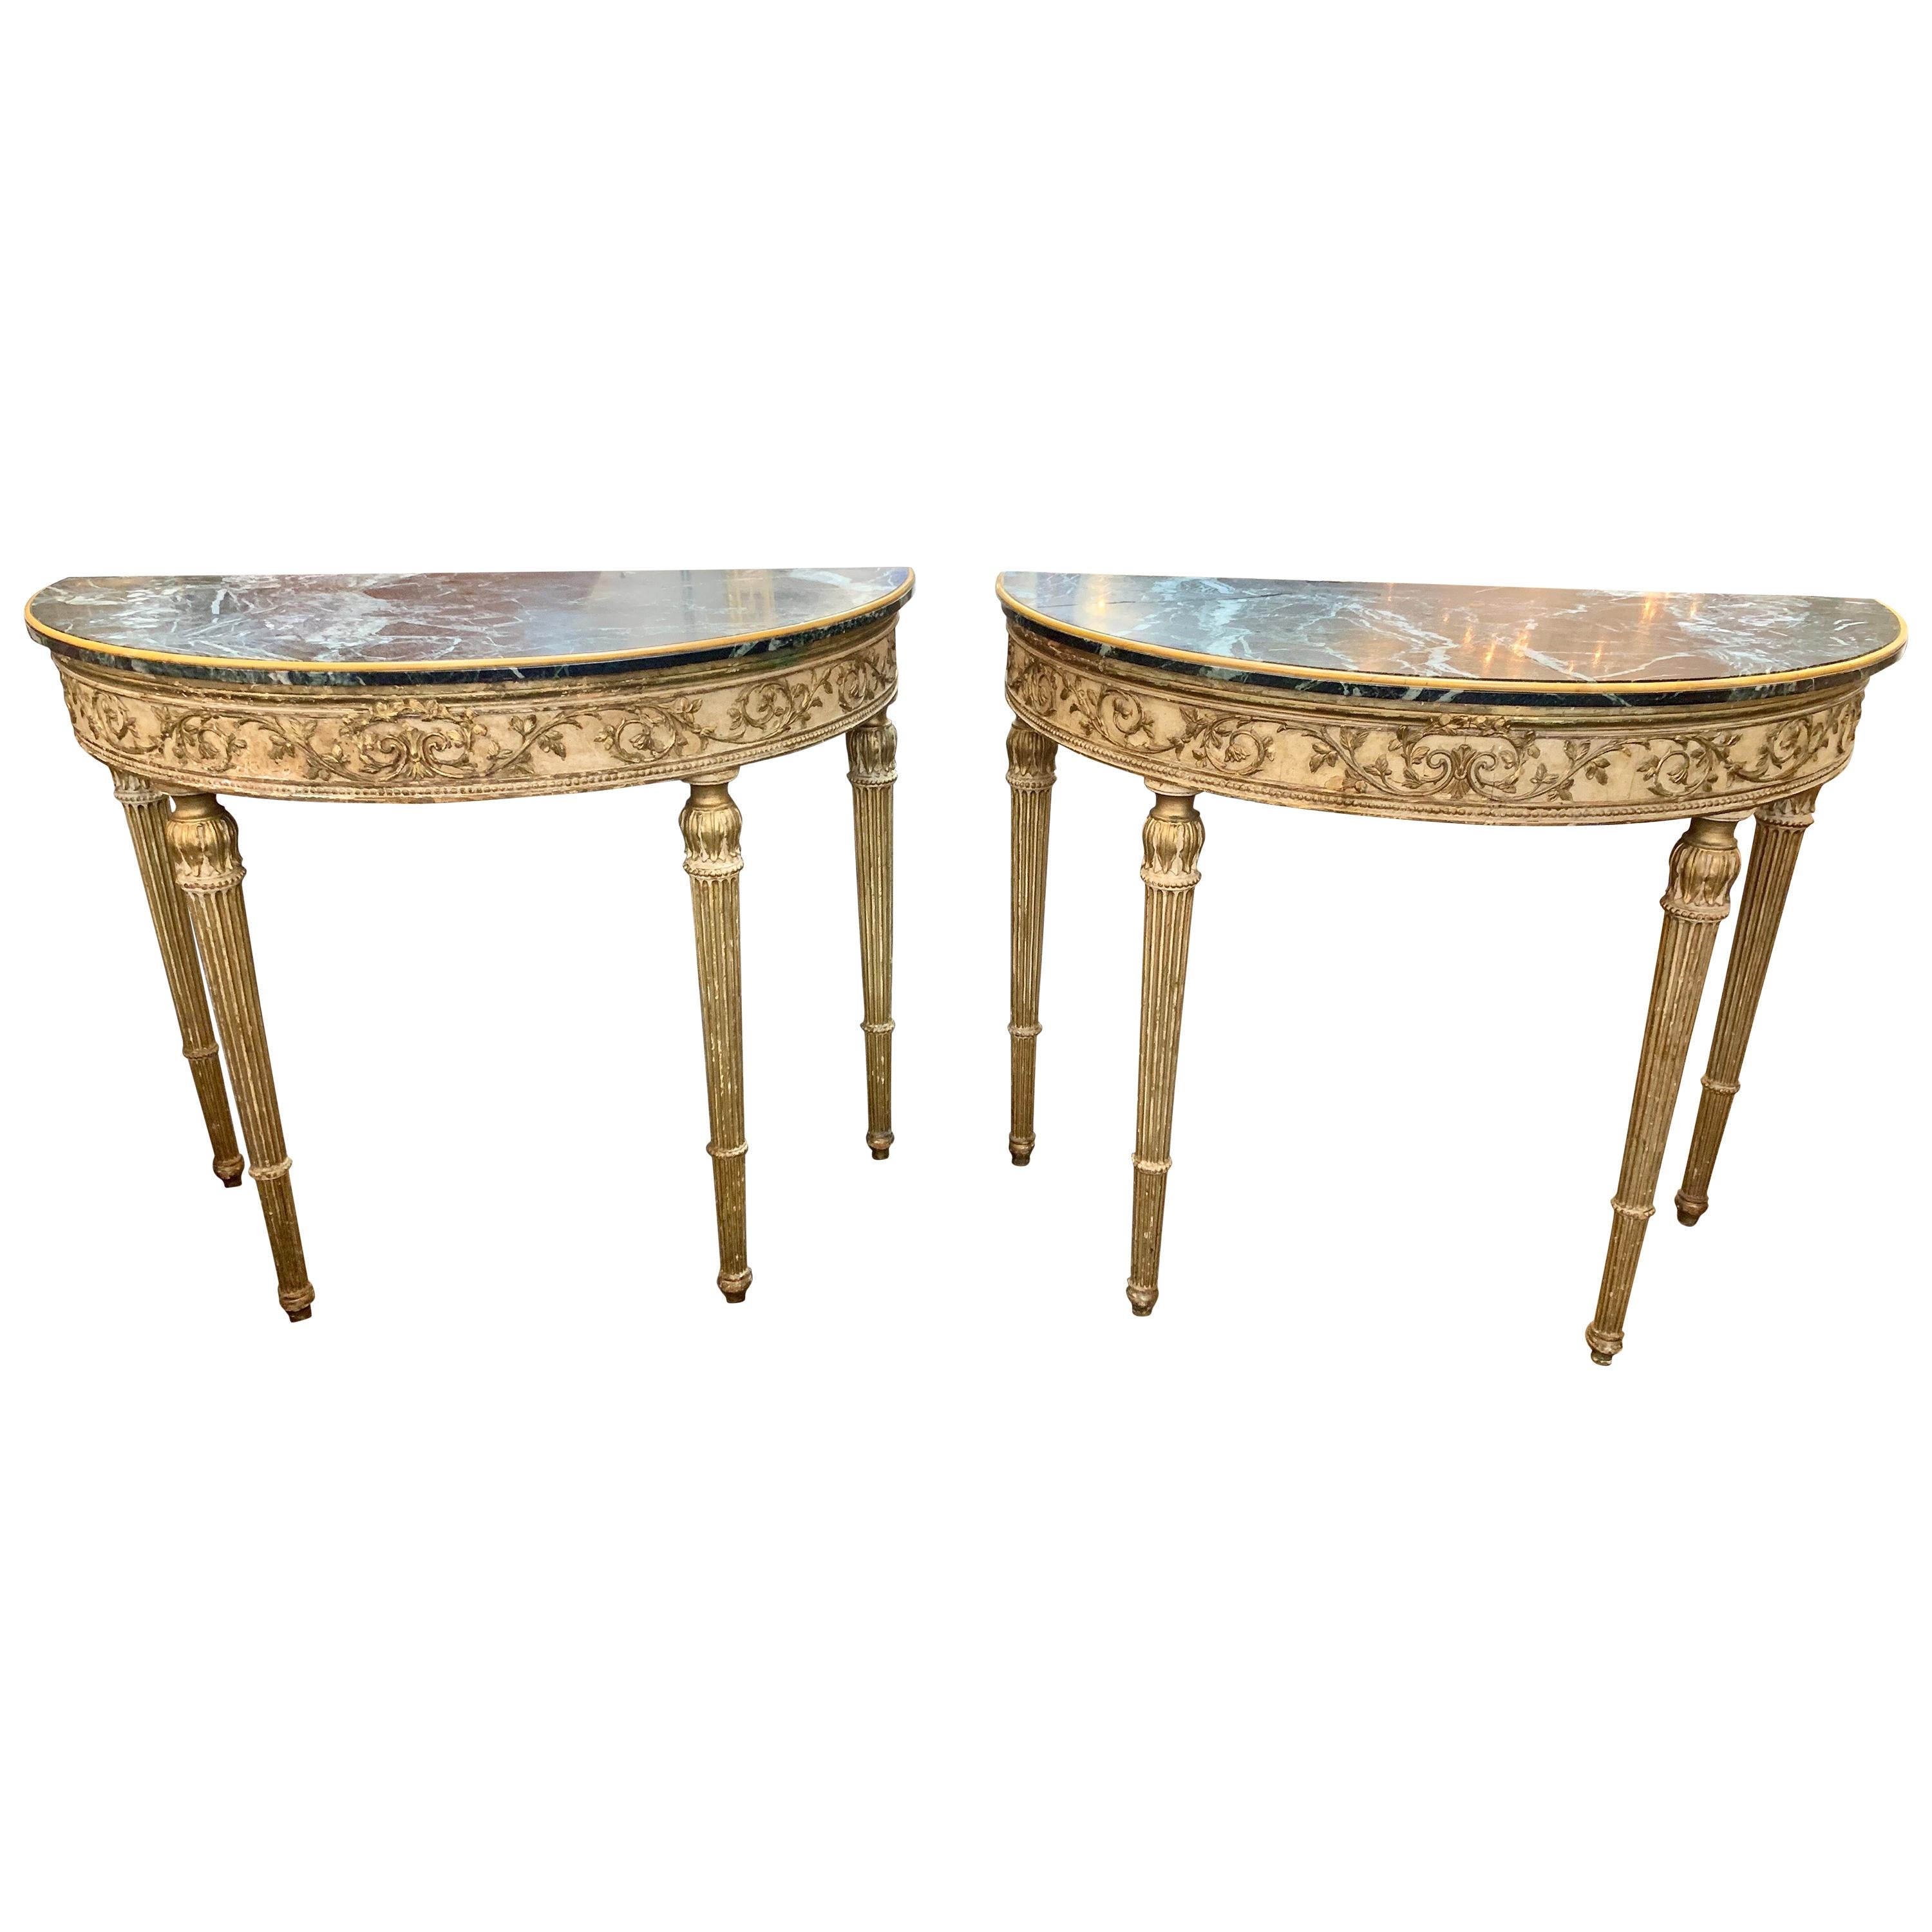 Pair of 19th Century French Louis XVI Style Parcel-Gilt Demi-Lune Consoles